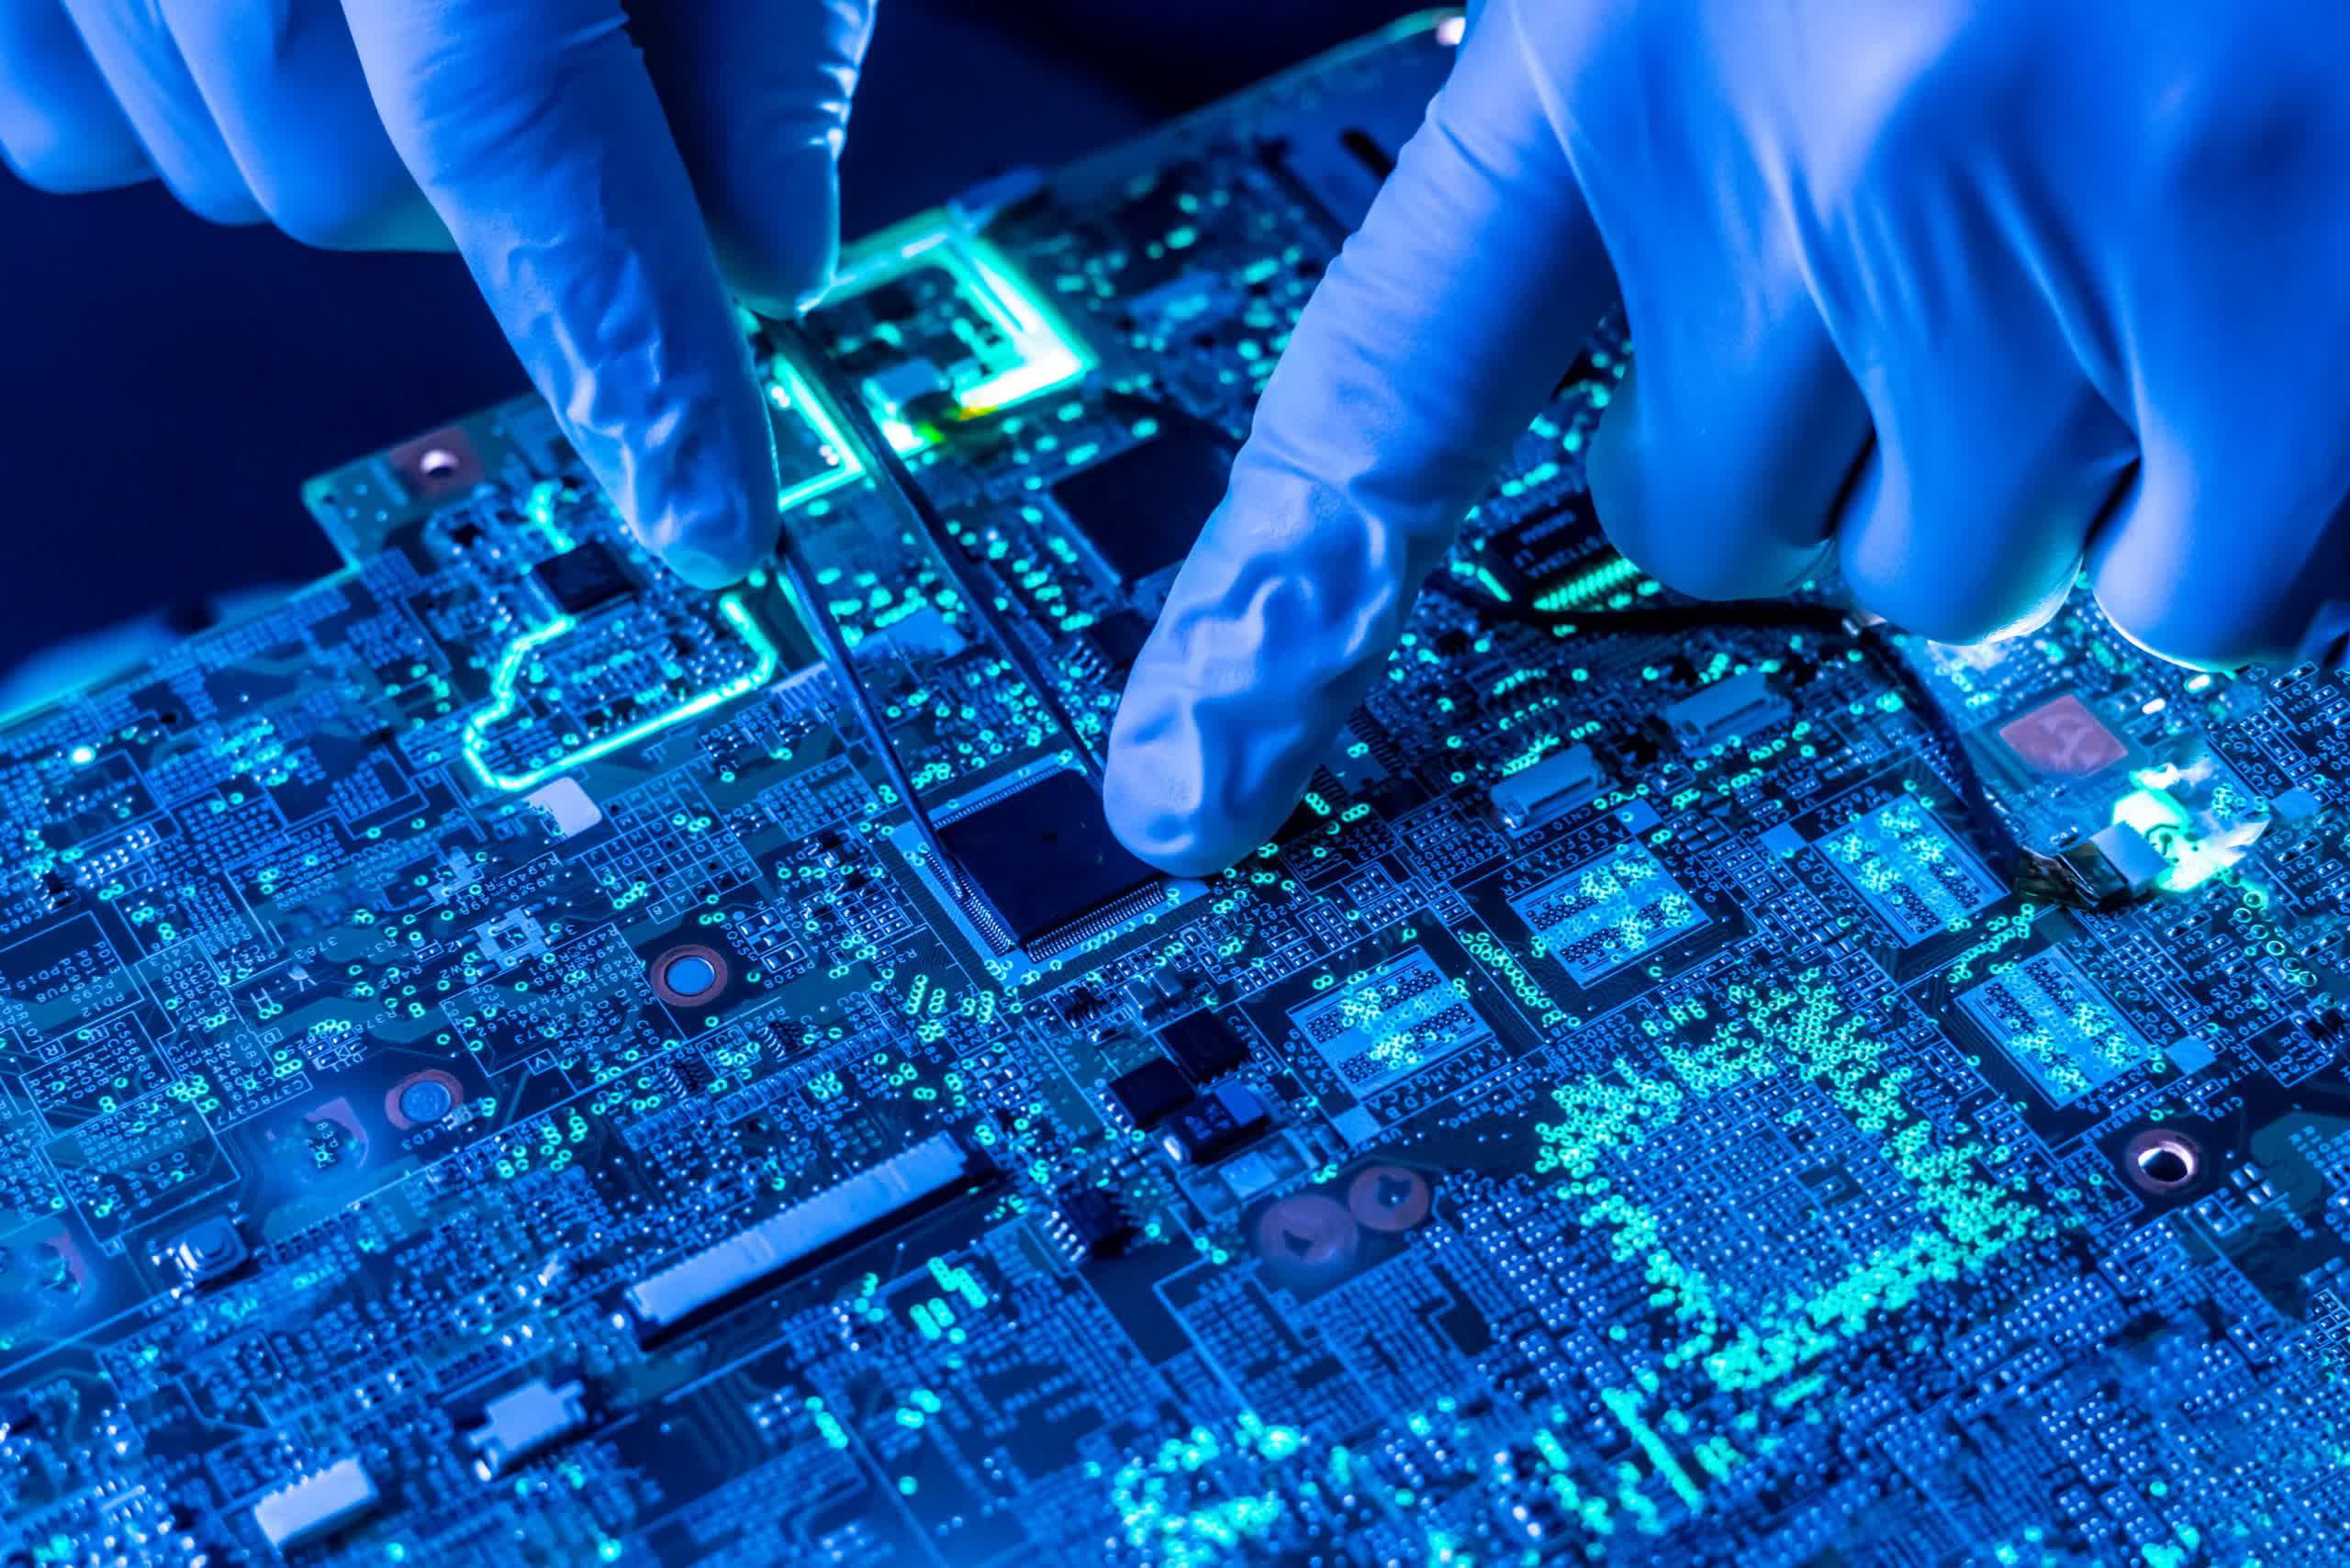 When it comes to semiconductors, leading is not everything